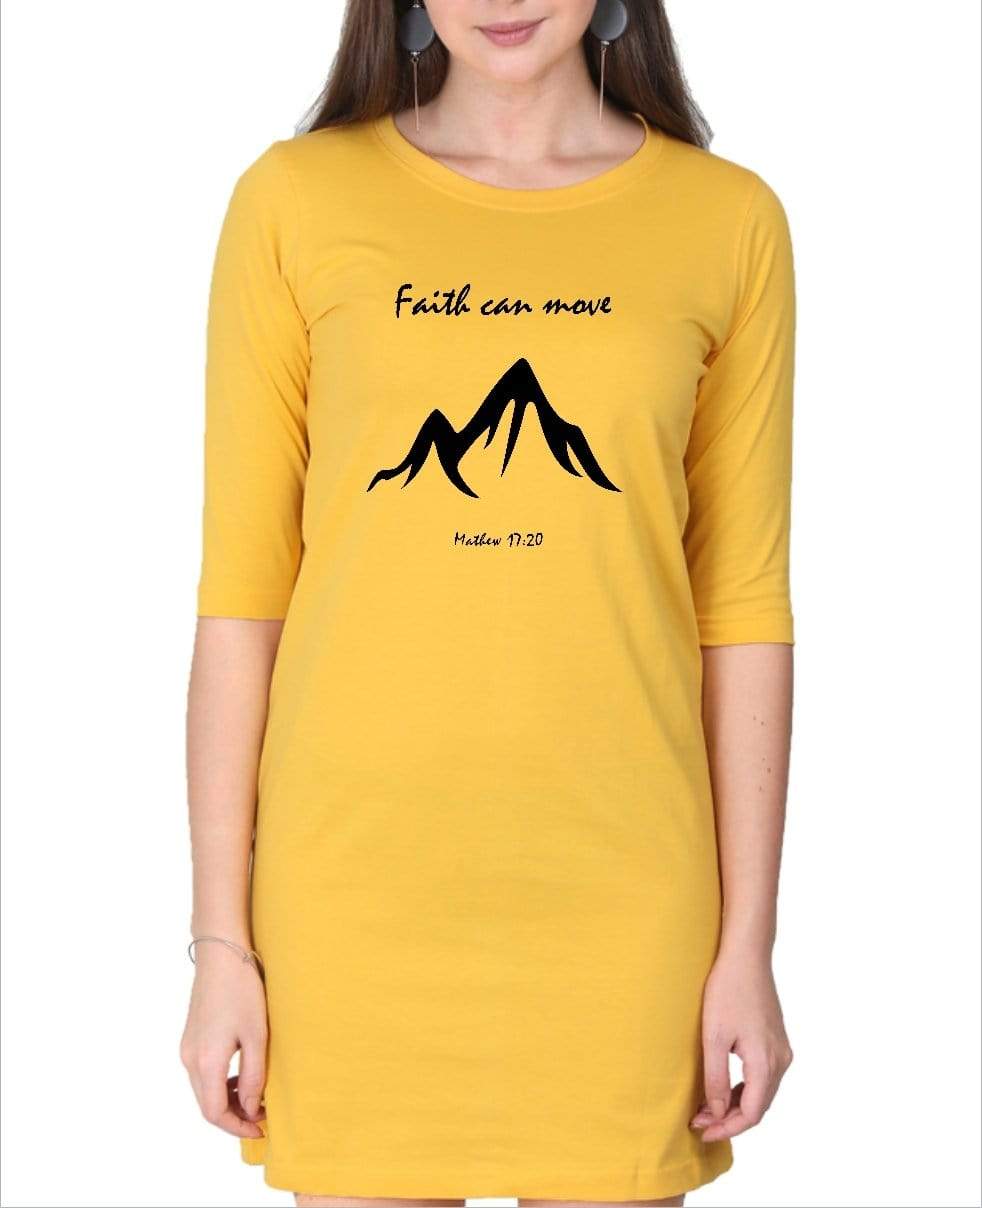 Living Words Women Round Neck T Shirt S / Yellow Faith can Move